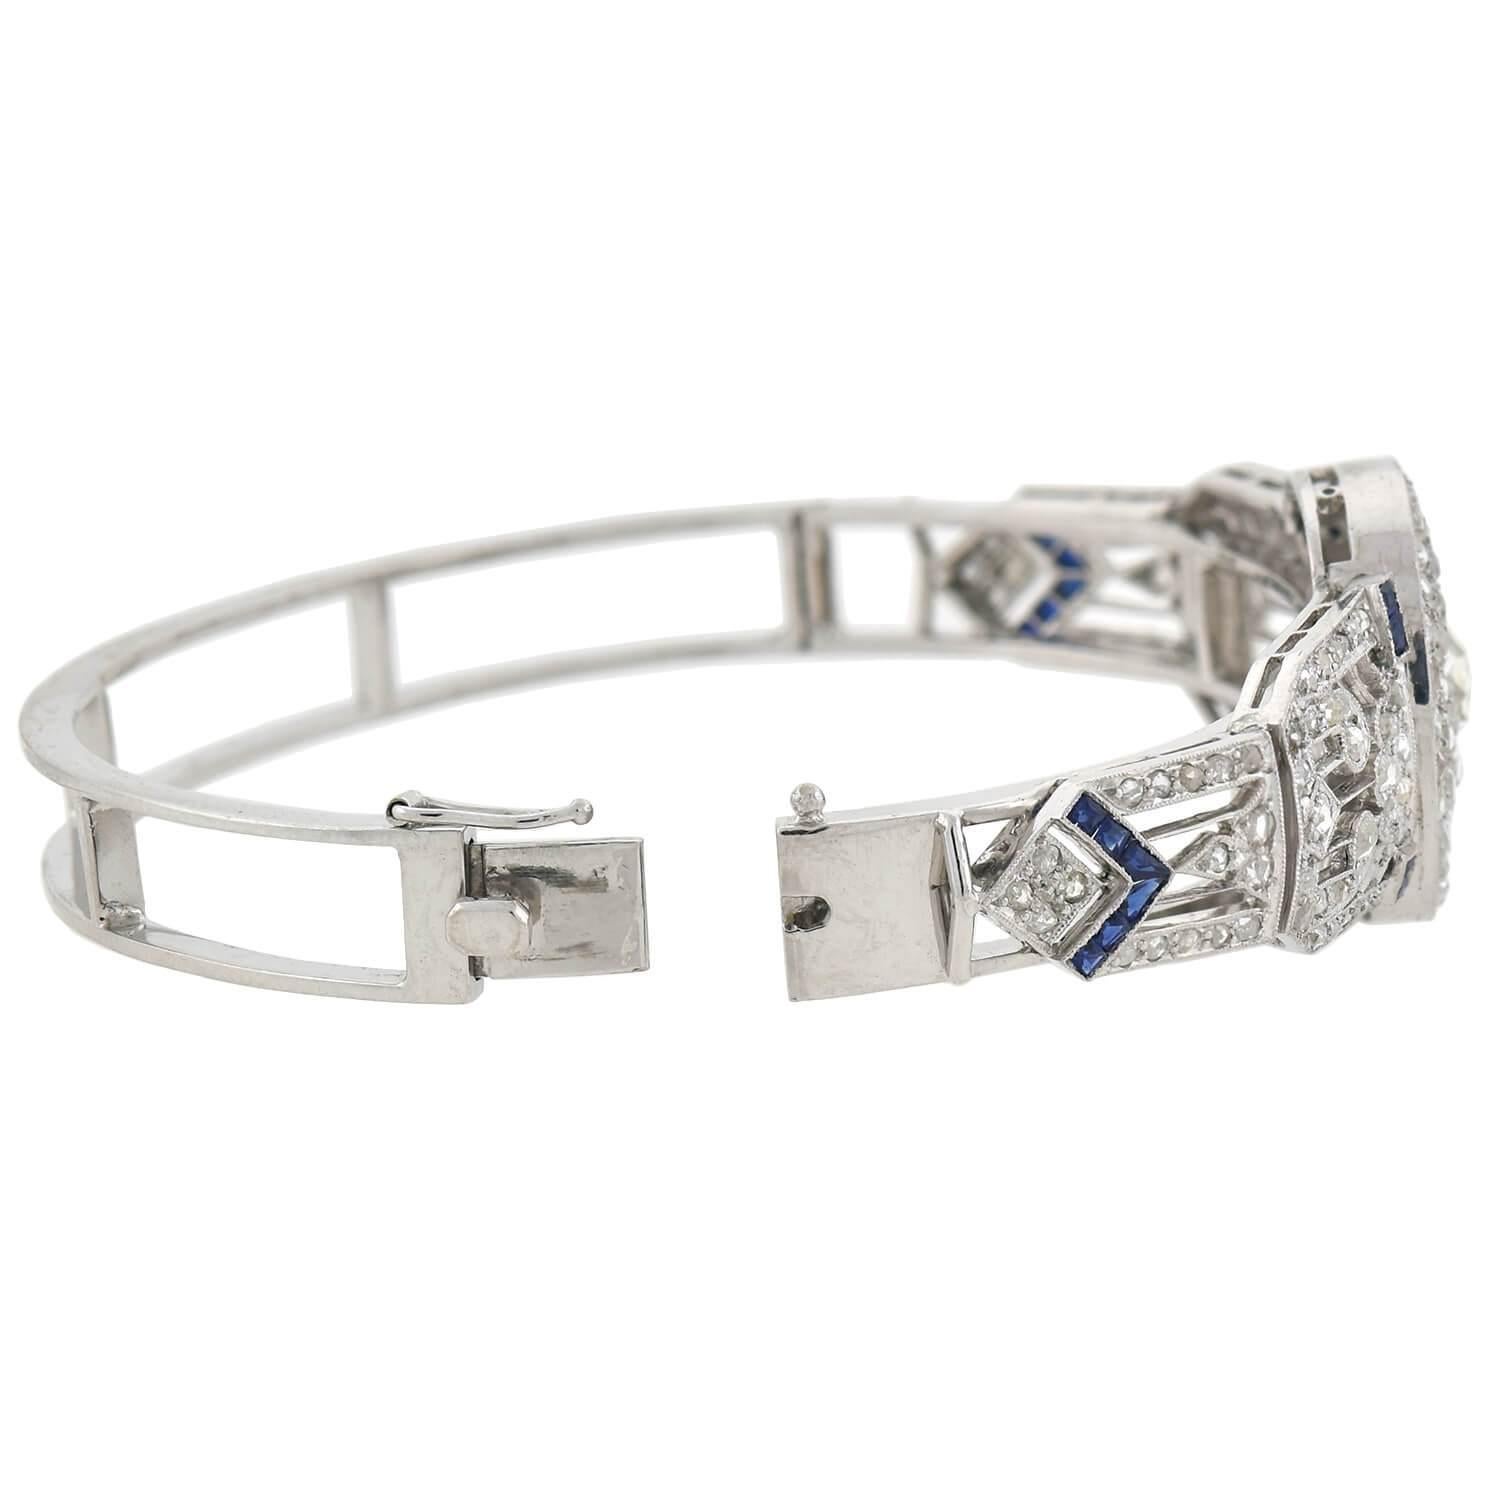 An exquisite diamond and sapphire bracelet from the Edwardian (ca1910) era! This gorgeous and unique platinum piece was once a flexible link bracelet that has since been converted to a fabulous hinged bangle. A sparkling array of old Rose Cut